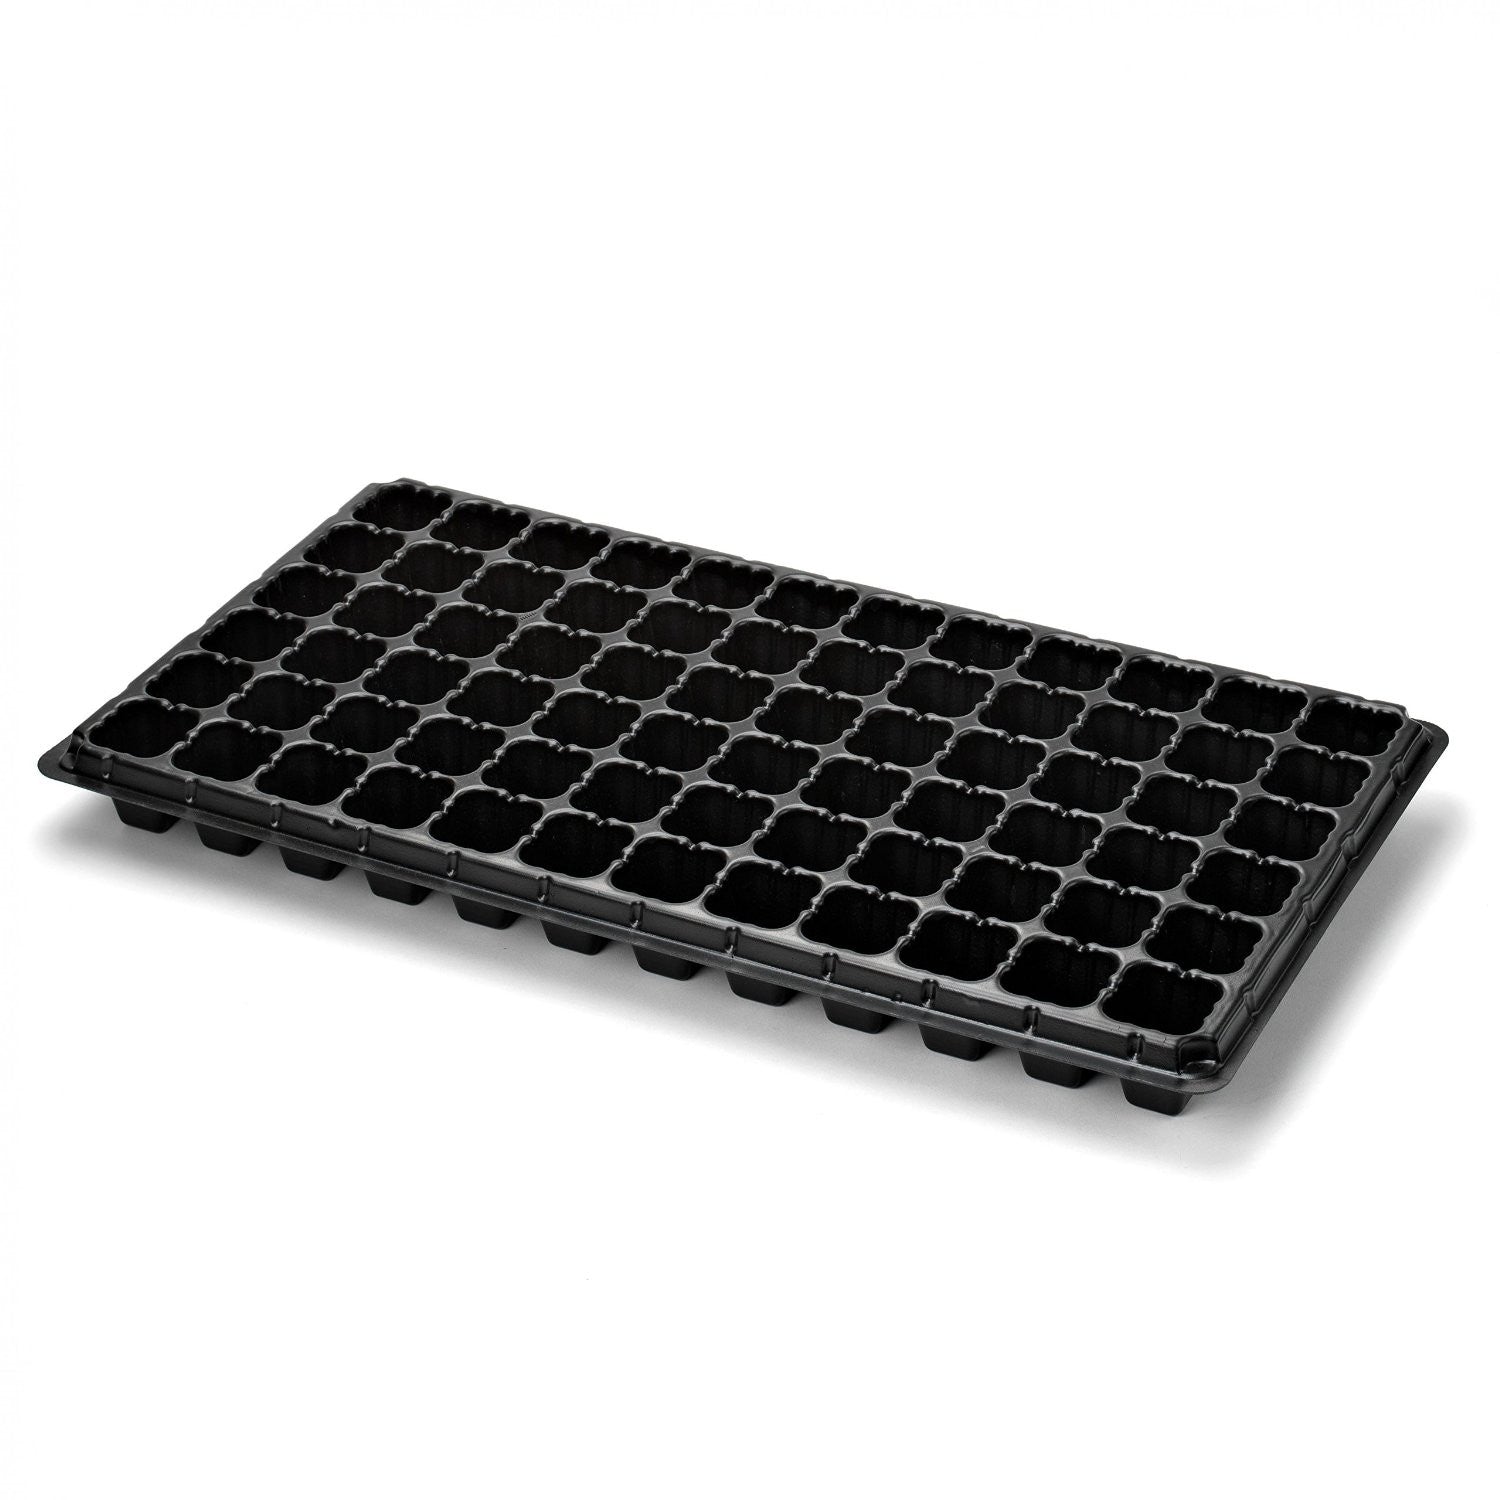 Extra Strength 72 Cell Seedling Starter Trays, 60 Pack, Seed Germination, Plant Propagation, Hydroponics Plug Trays - EarthCitizen
 - 1